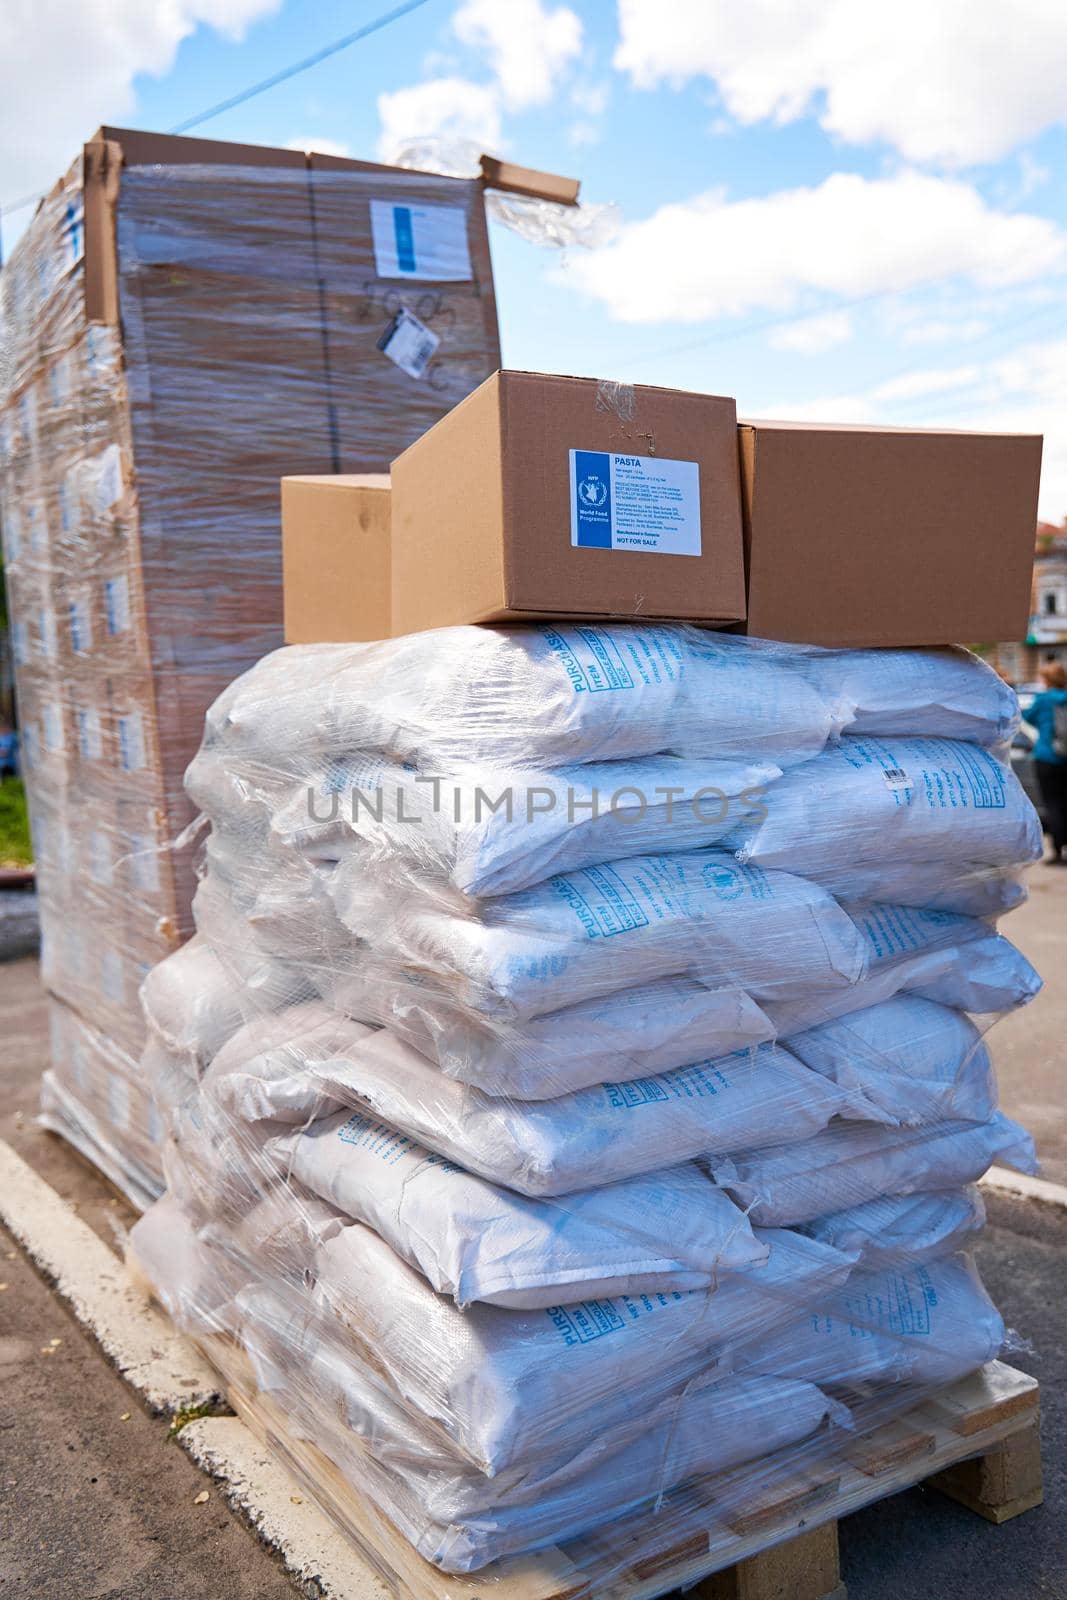 Humanitarian food aid unloaded in front of humanitarian centre. Dnipro, Ukraine - 05.17.2022